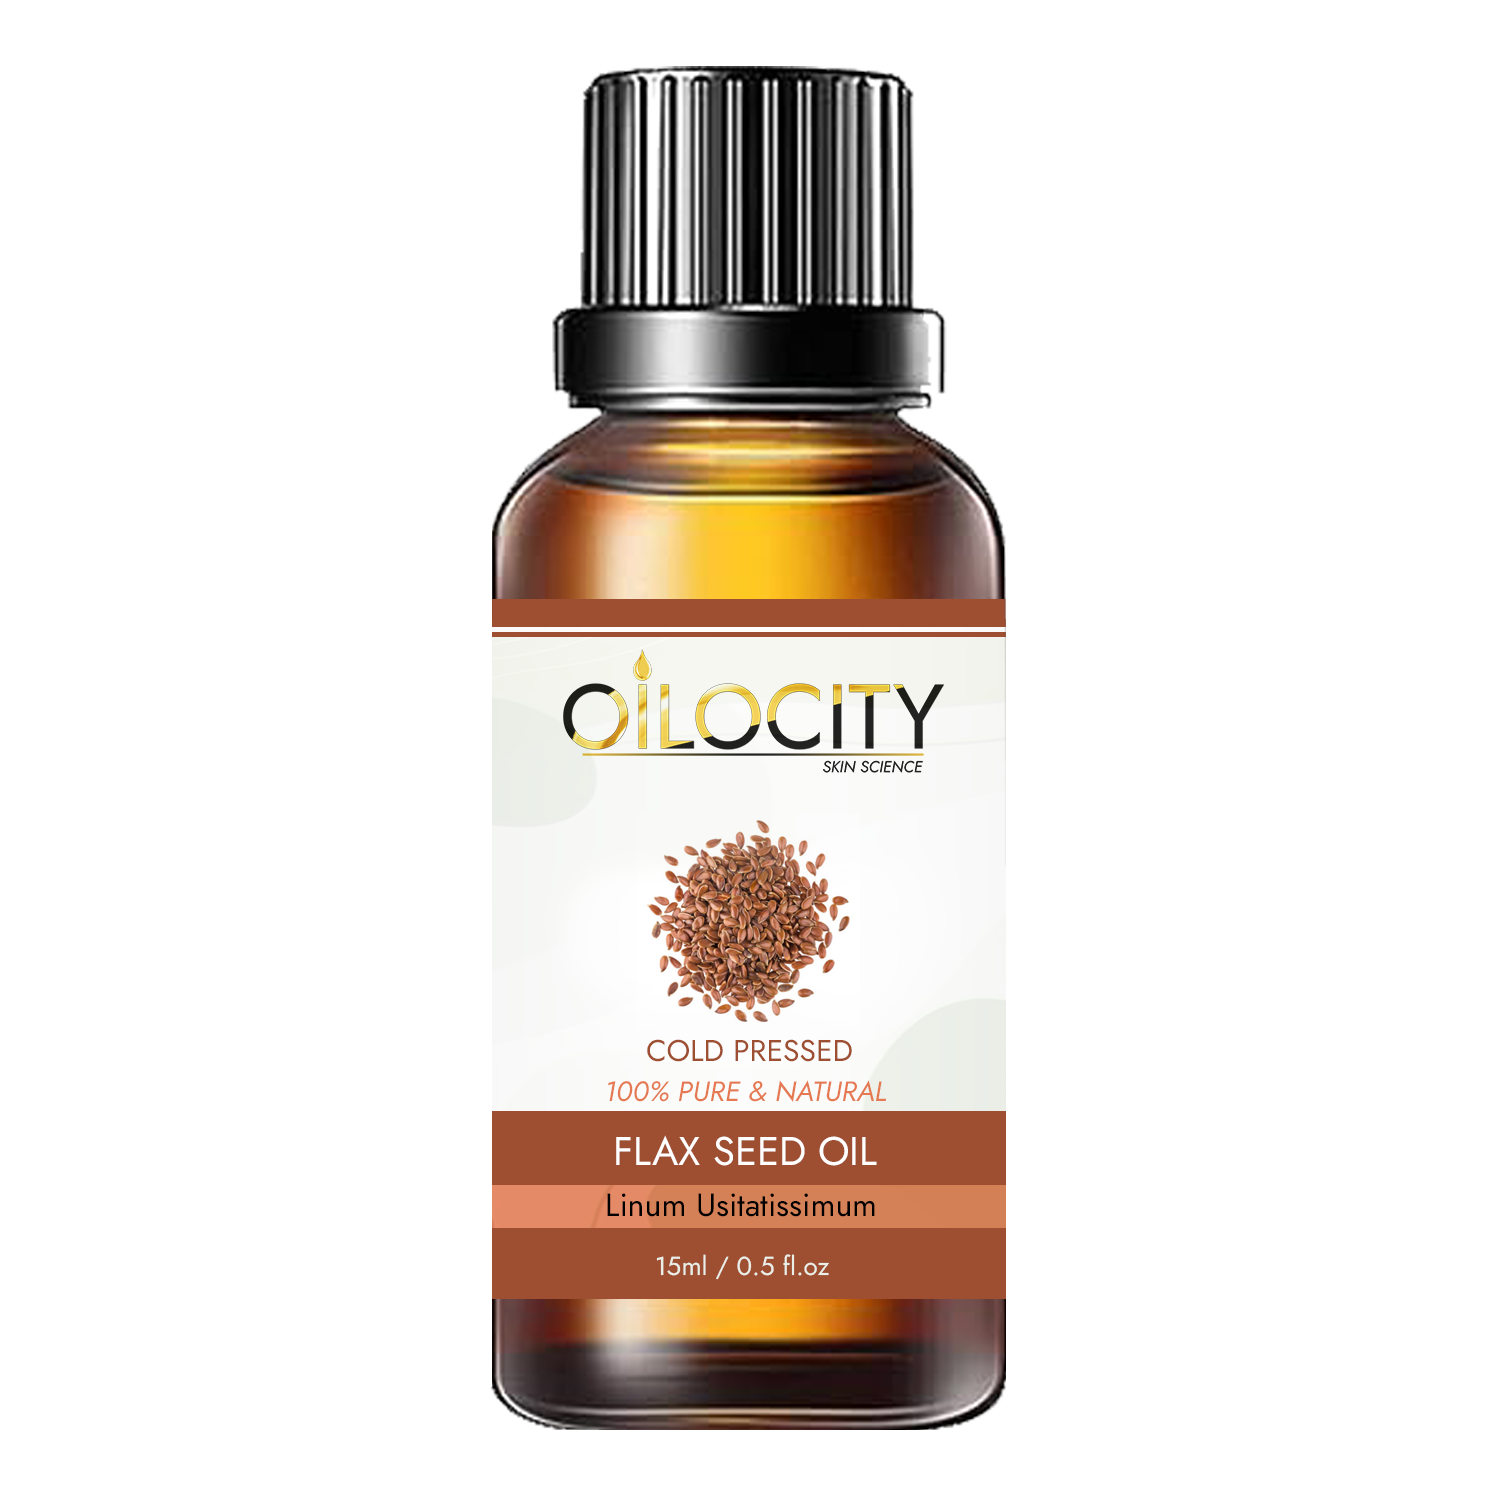 Flax Seed Cold Pressed Oil (15ml) – Welcome To Oilocity Skin Science